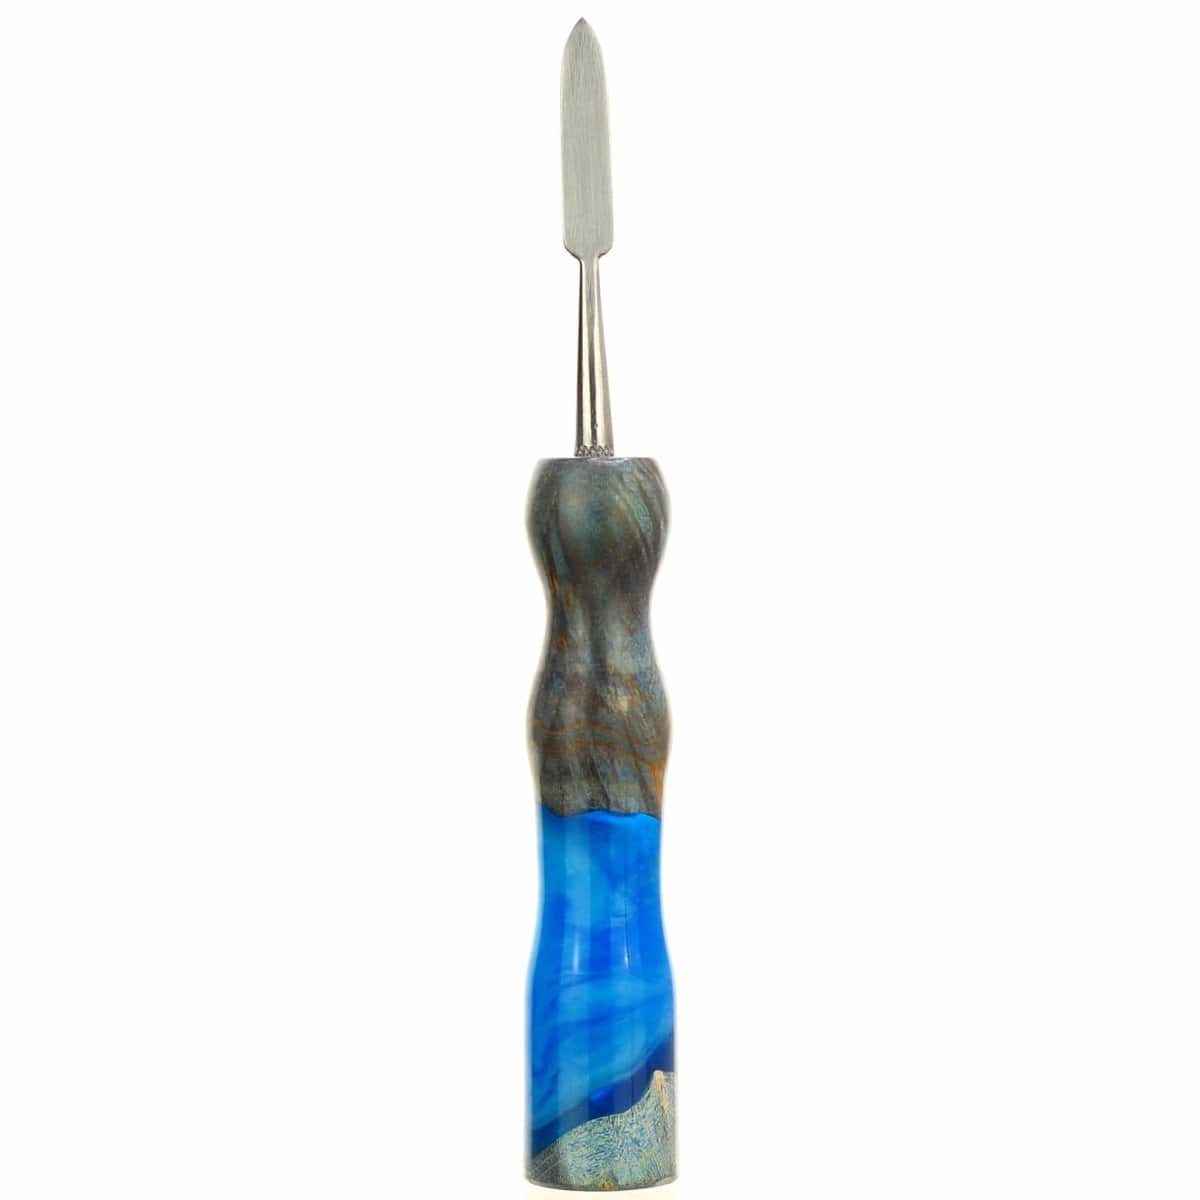 Galactic Crafts Accessory Blue Design- Pointed Wood Worked Resin Dab Tool